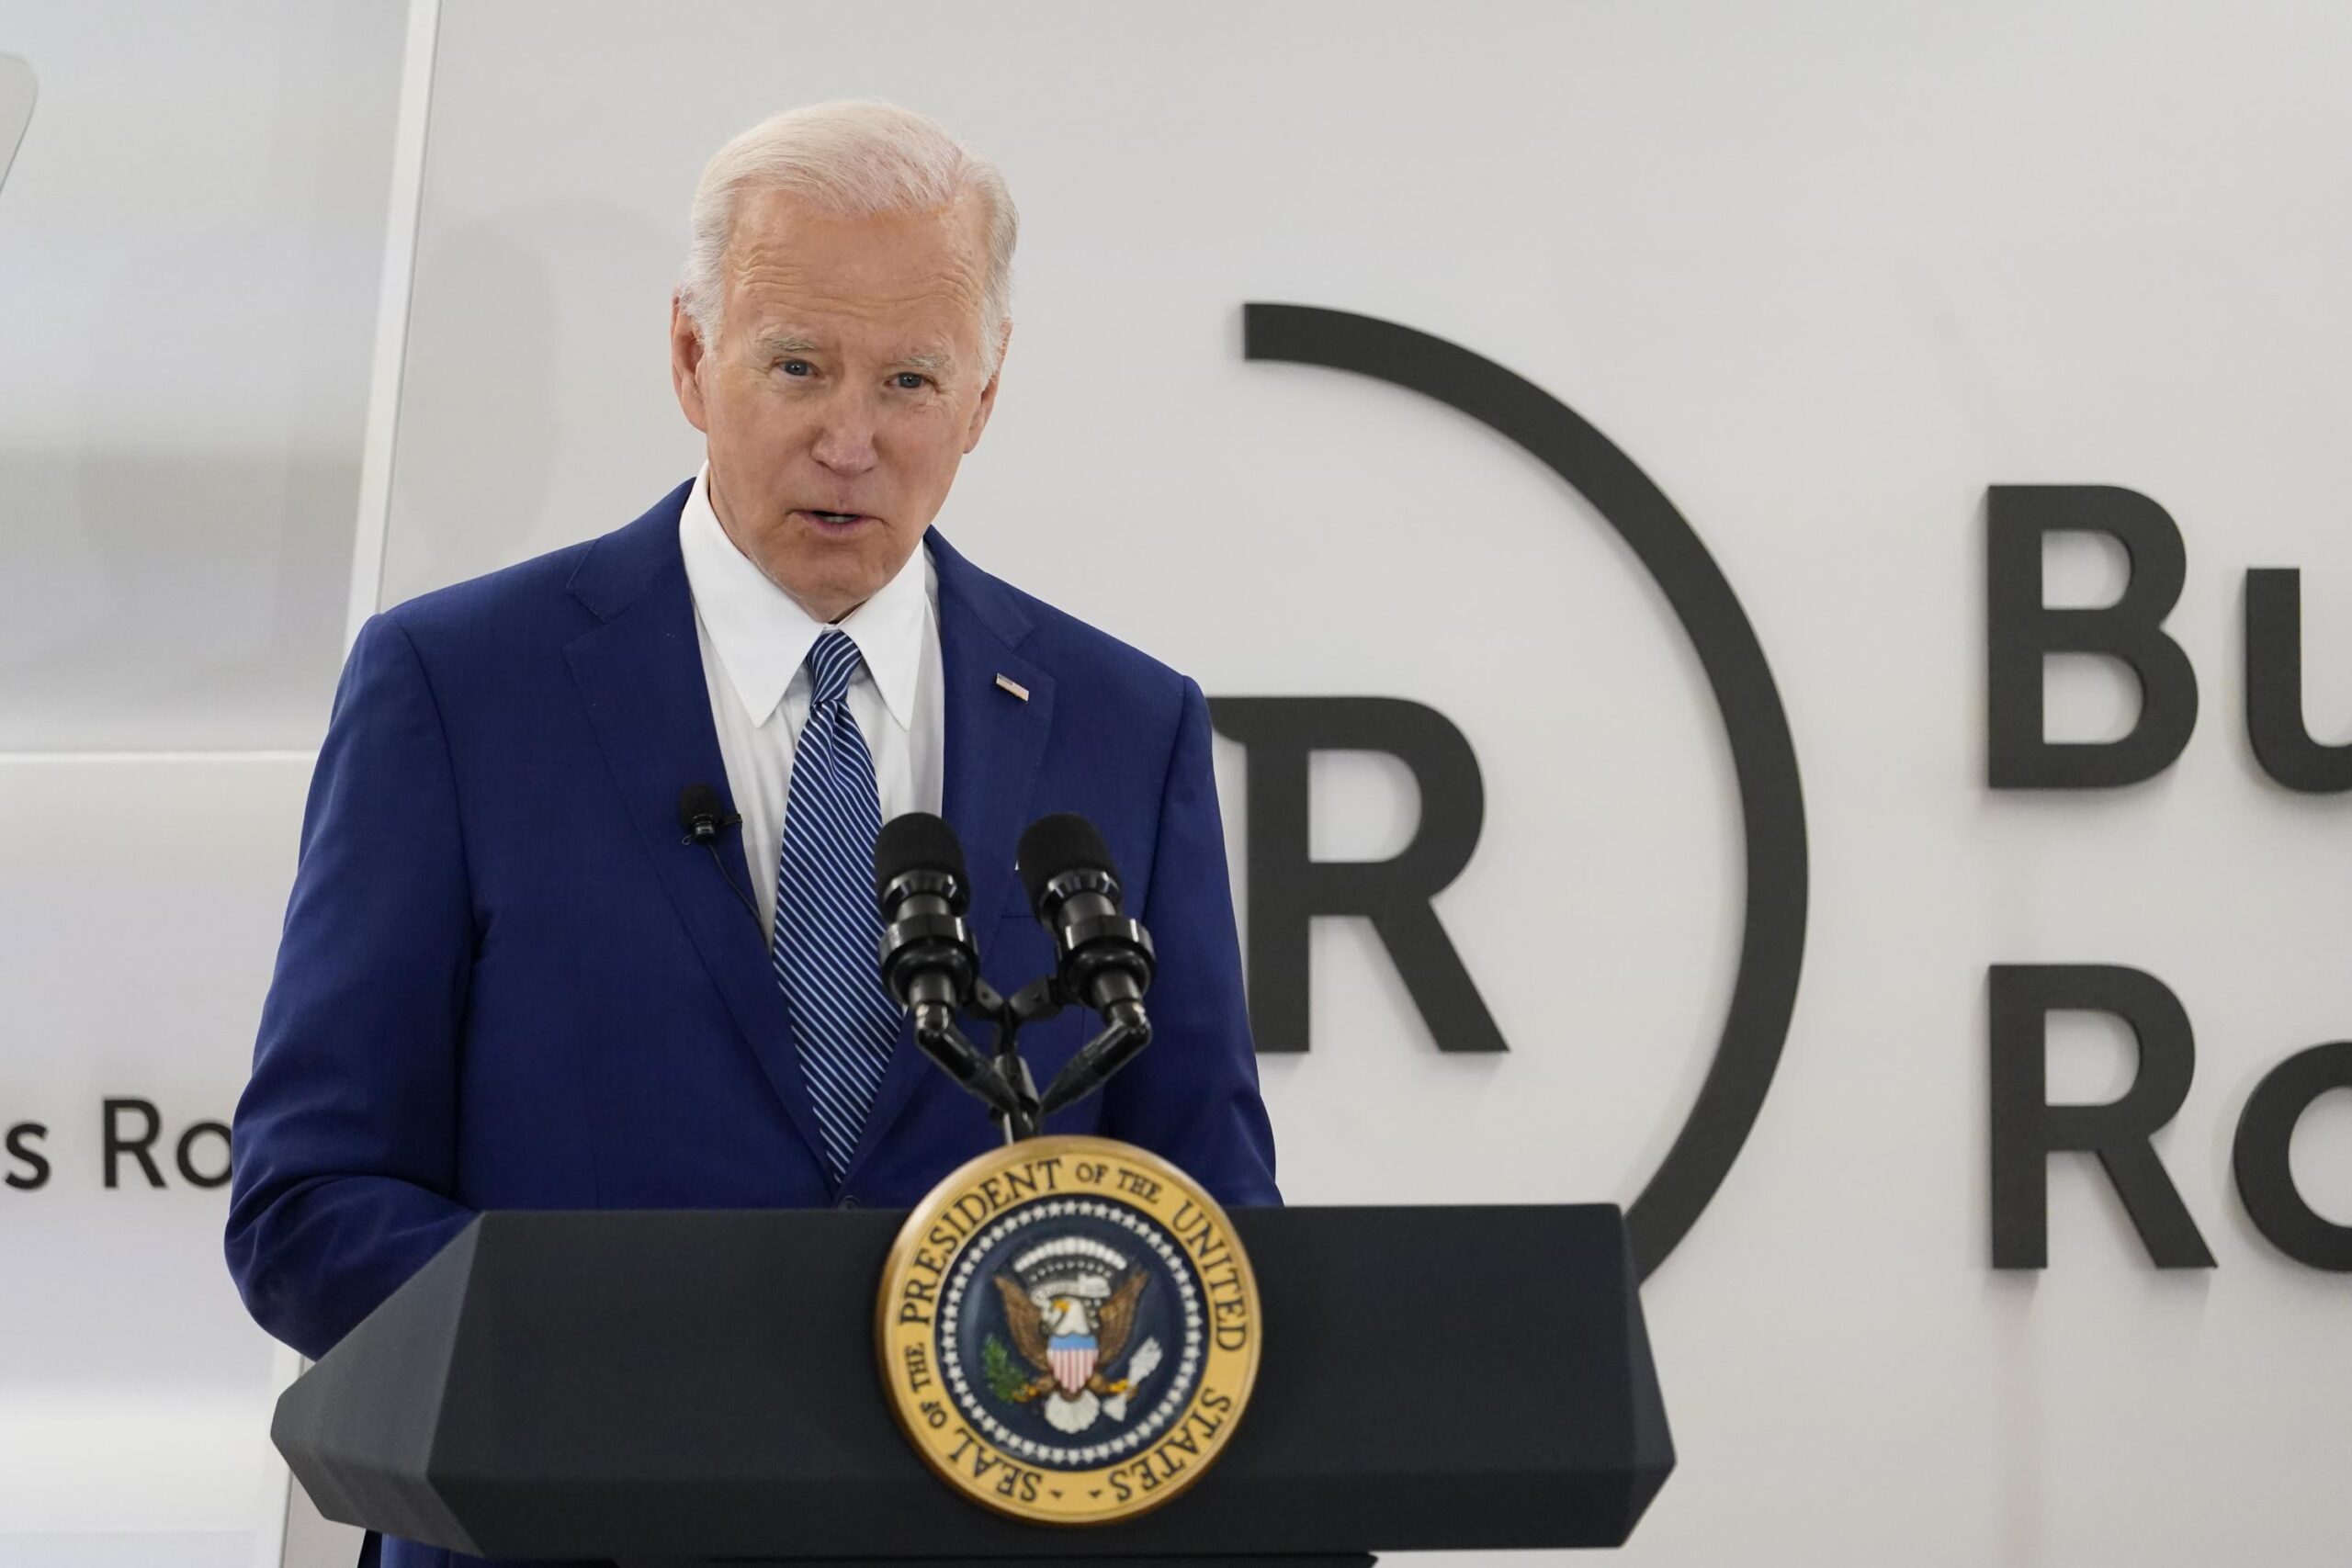 Biden discusses cybersecurity solutions and IT support at the business roundtable.